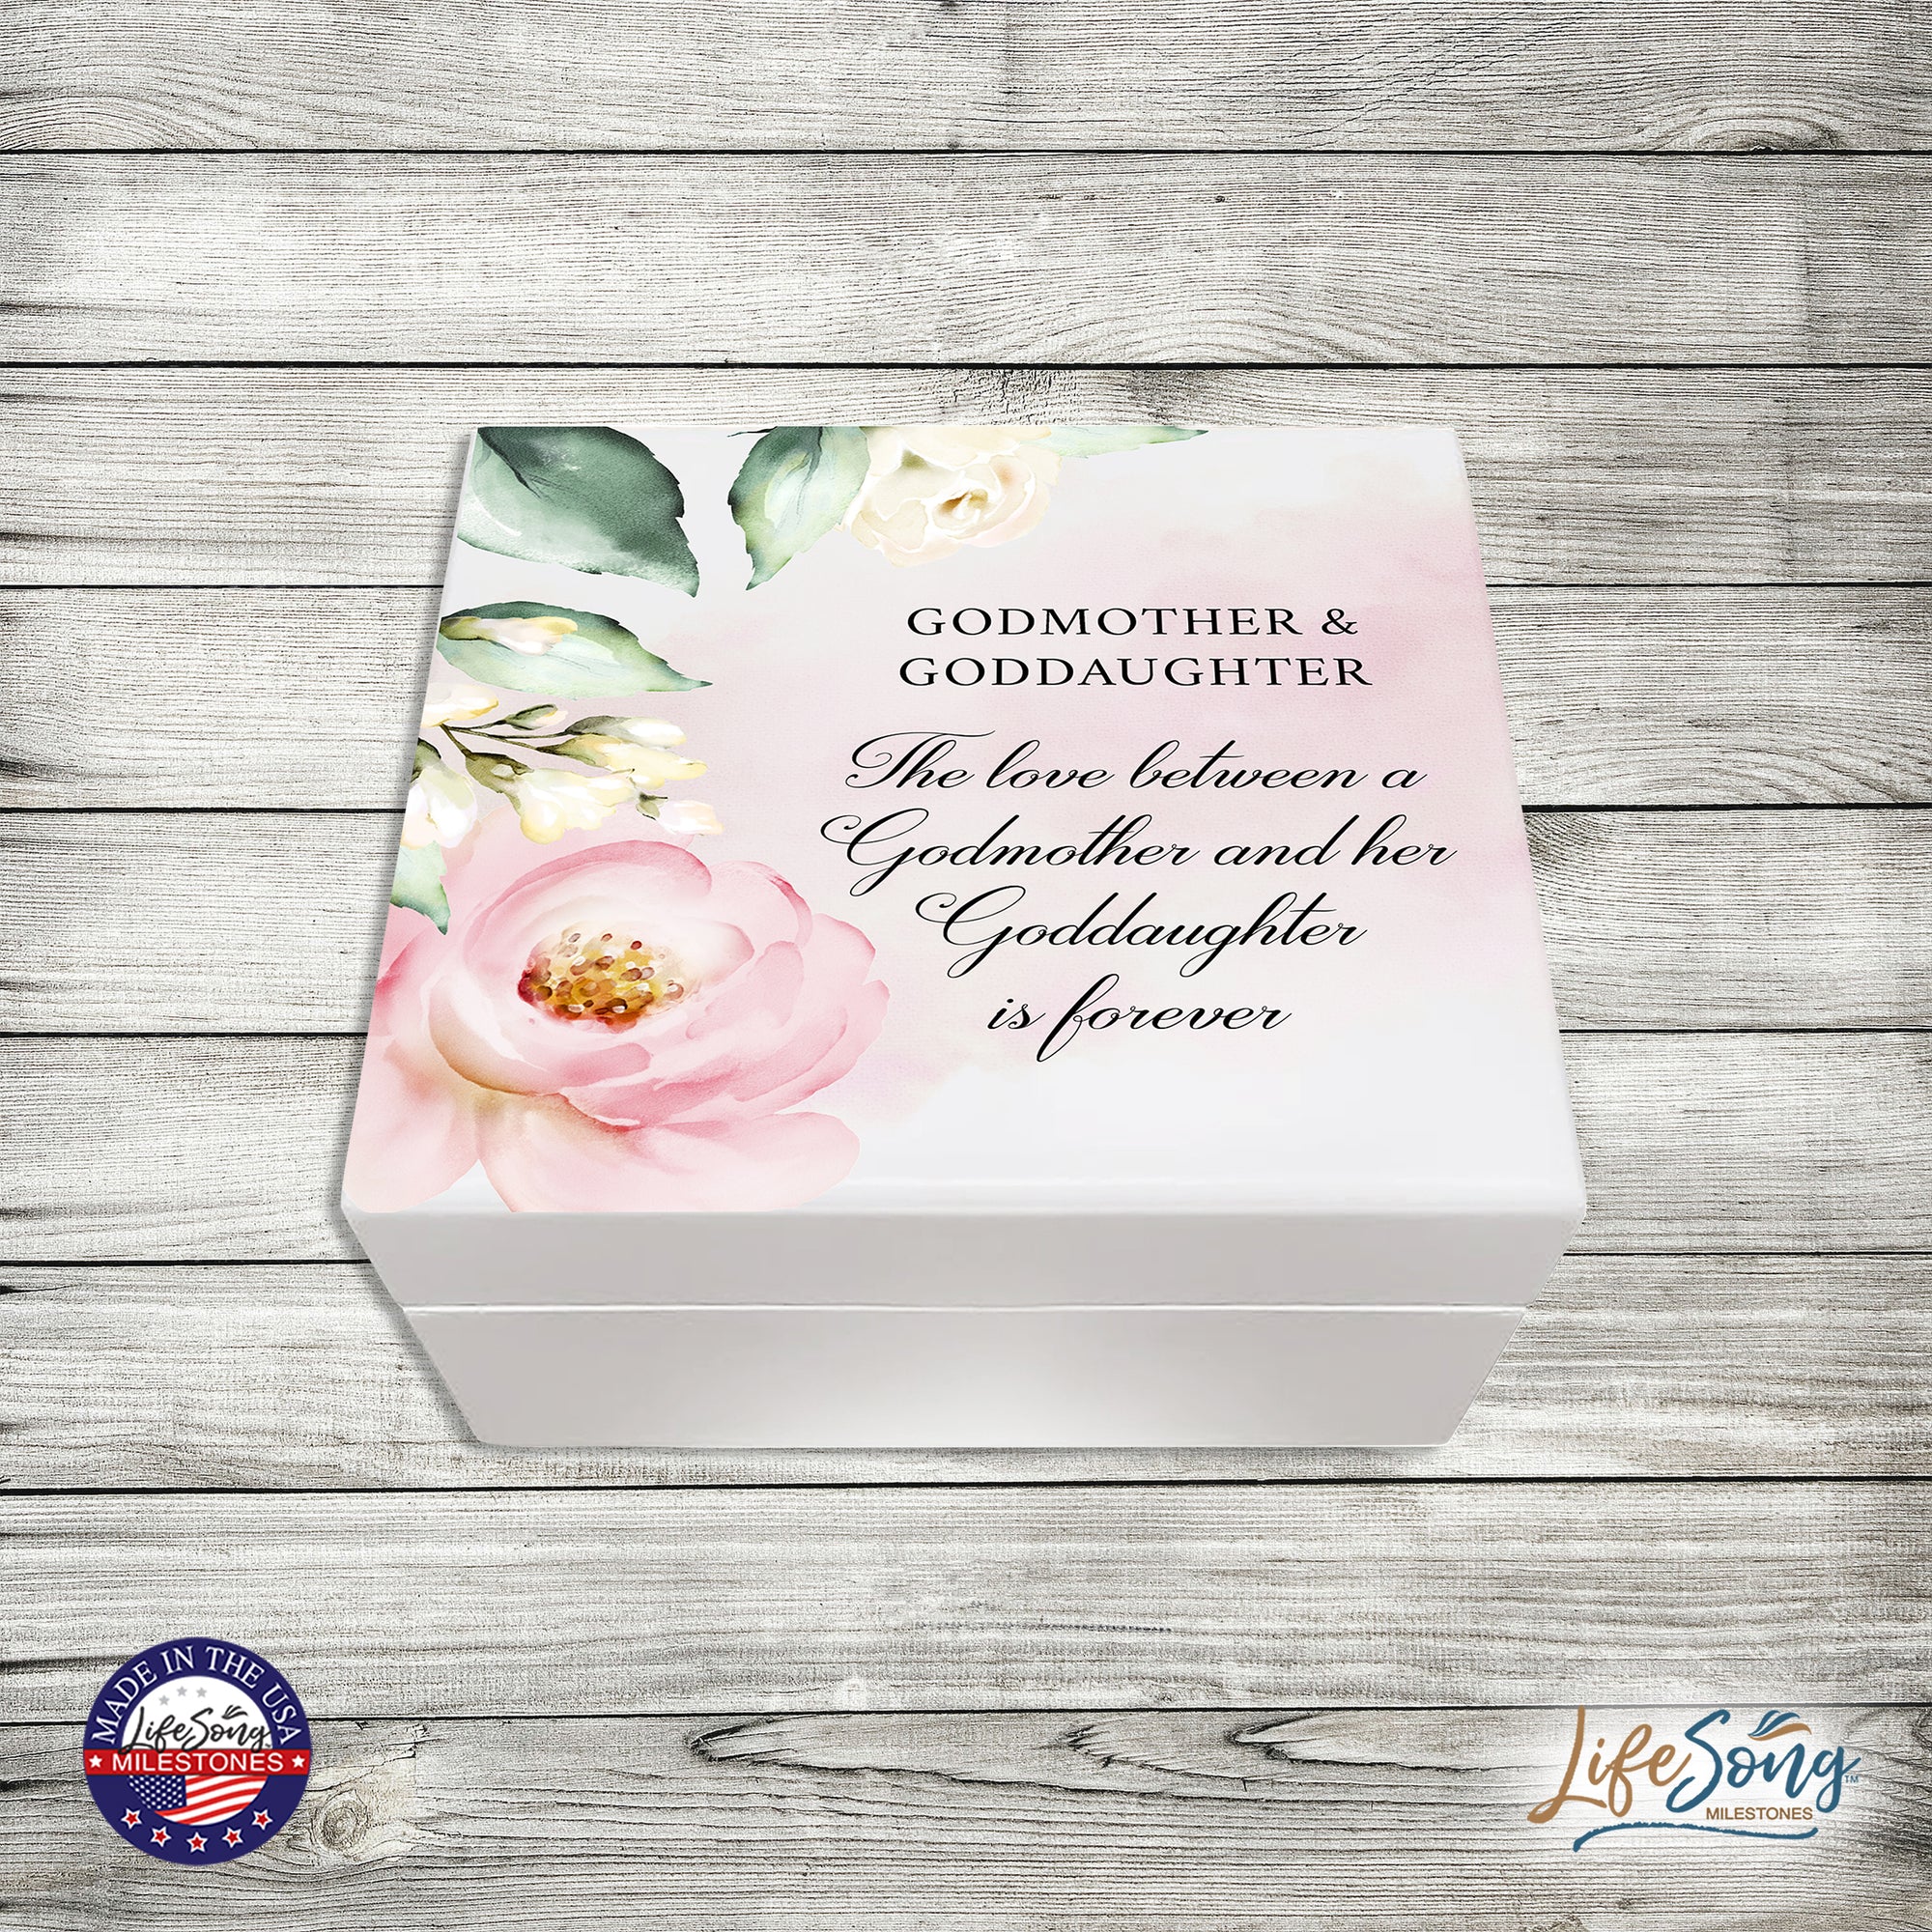 LifeSong Milestones Modern Inspirational White Jewelry Keepsake Box for GodMother 6x5.5 - The Love Between. Housewarming keepsake gifts for your beloved GodMother. Perfect gift to hold your watches, rings, cufflinks, bracelets, necklaces & special mementos